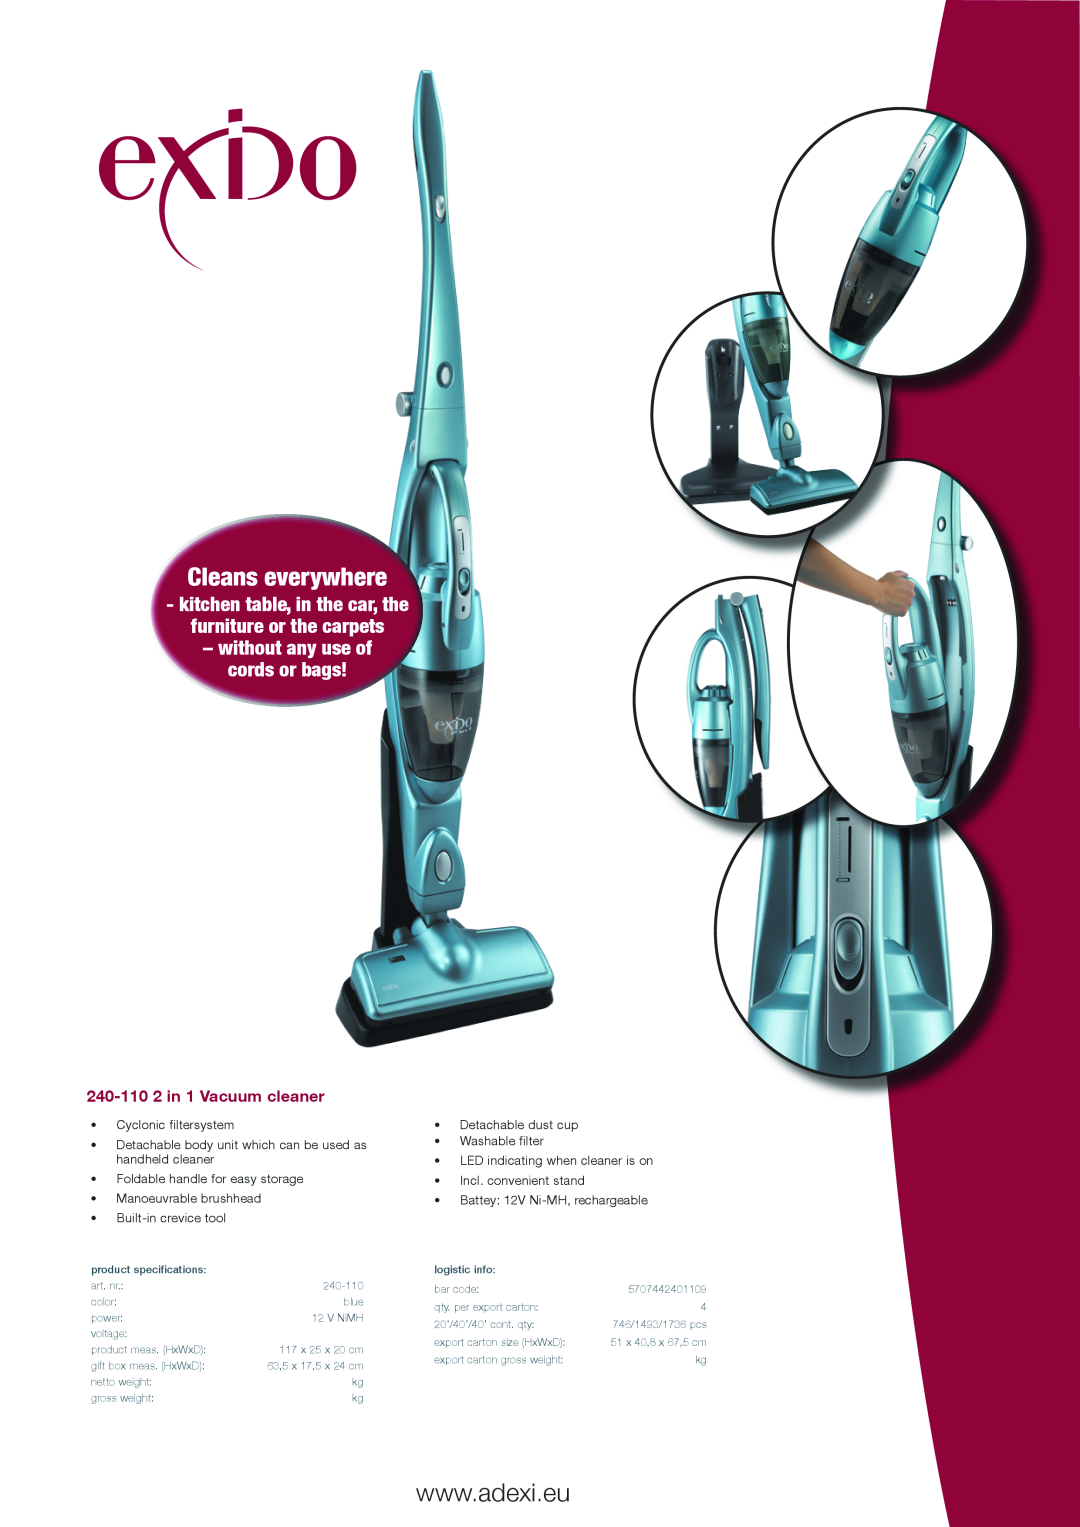 Melissa 240110 specifications Cleans everywhere, without any use of cords or bags, 240-1102 in 1 Vacuum cleaner 